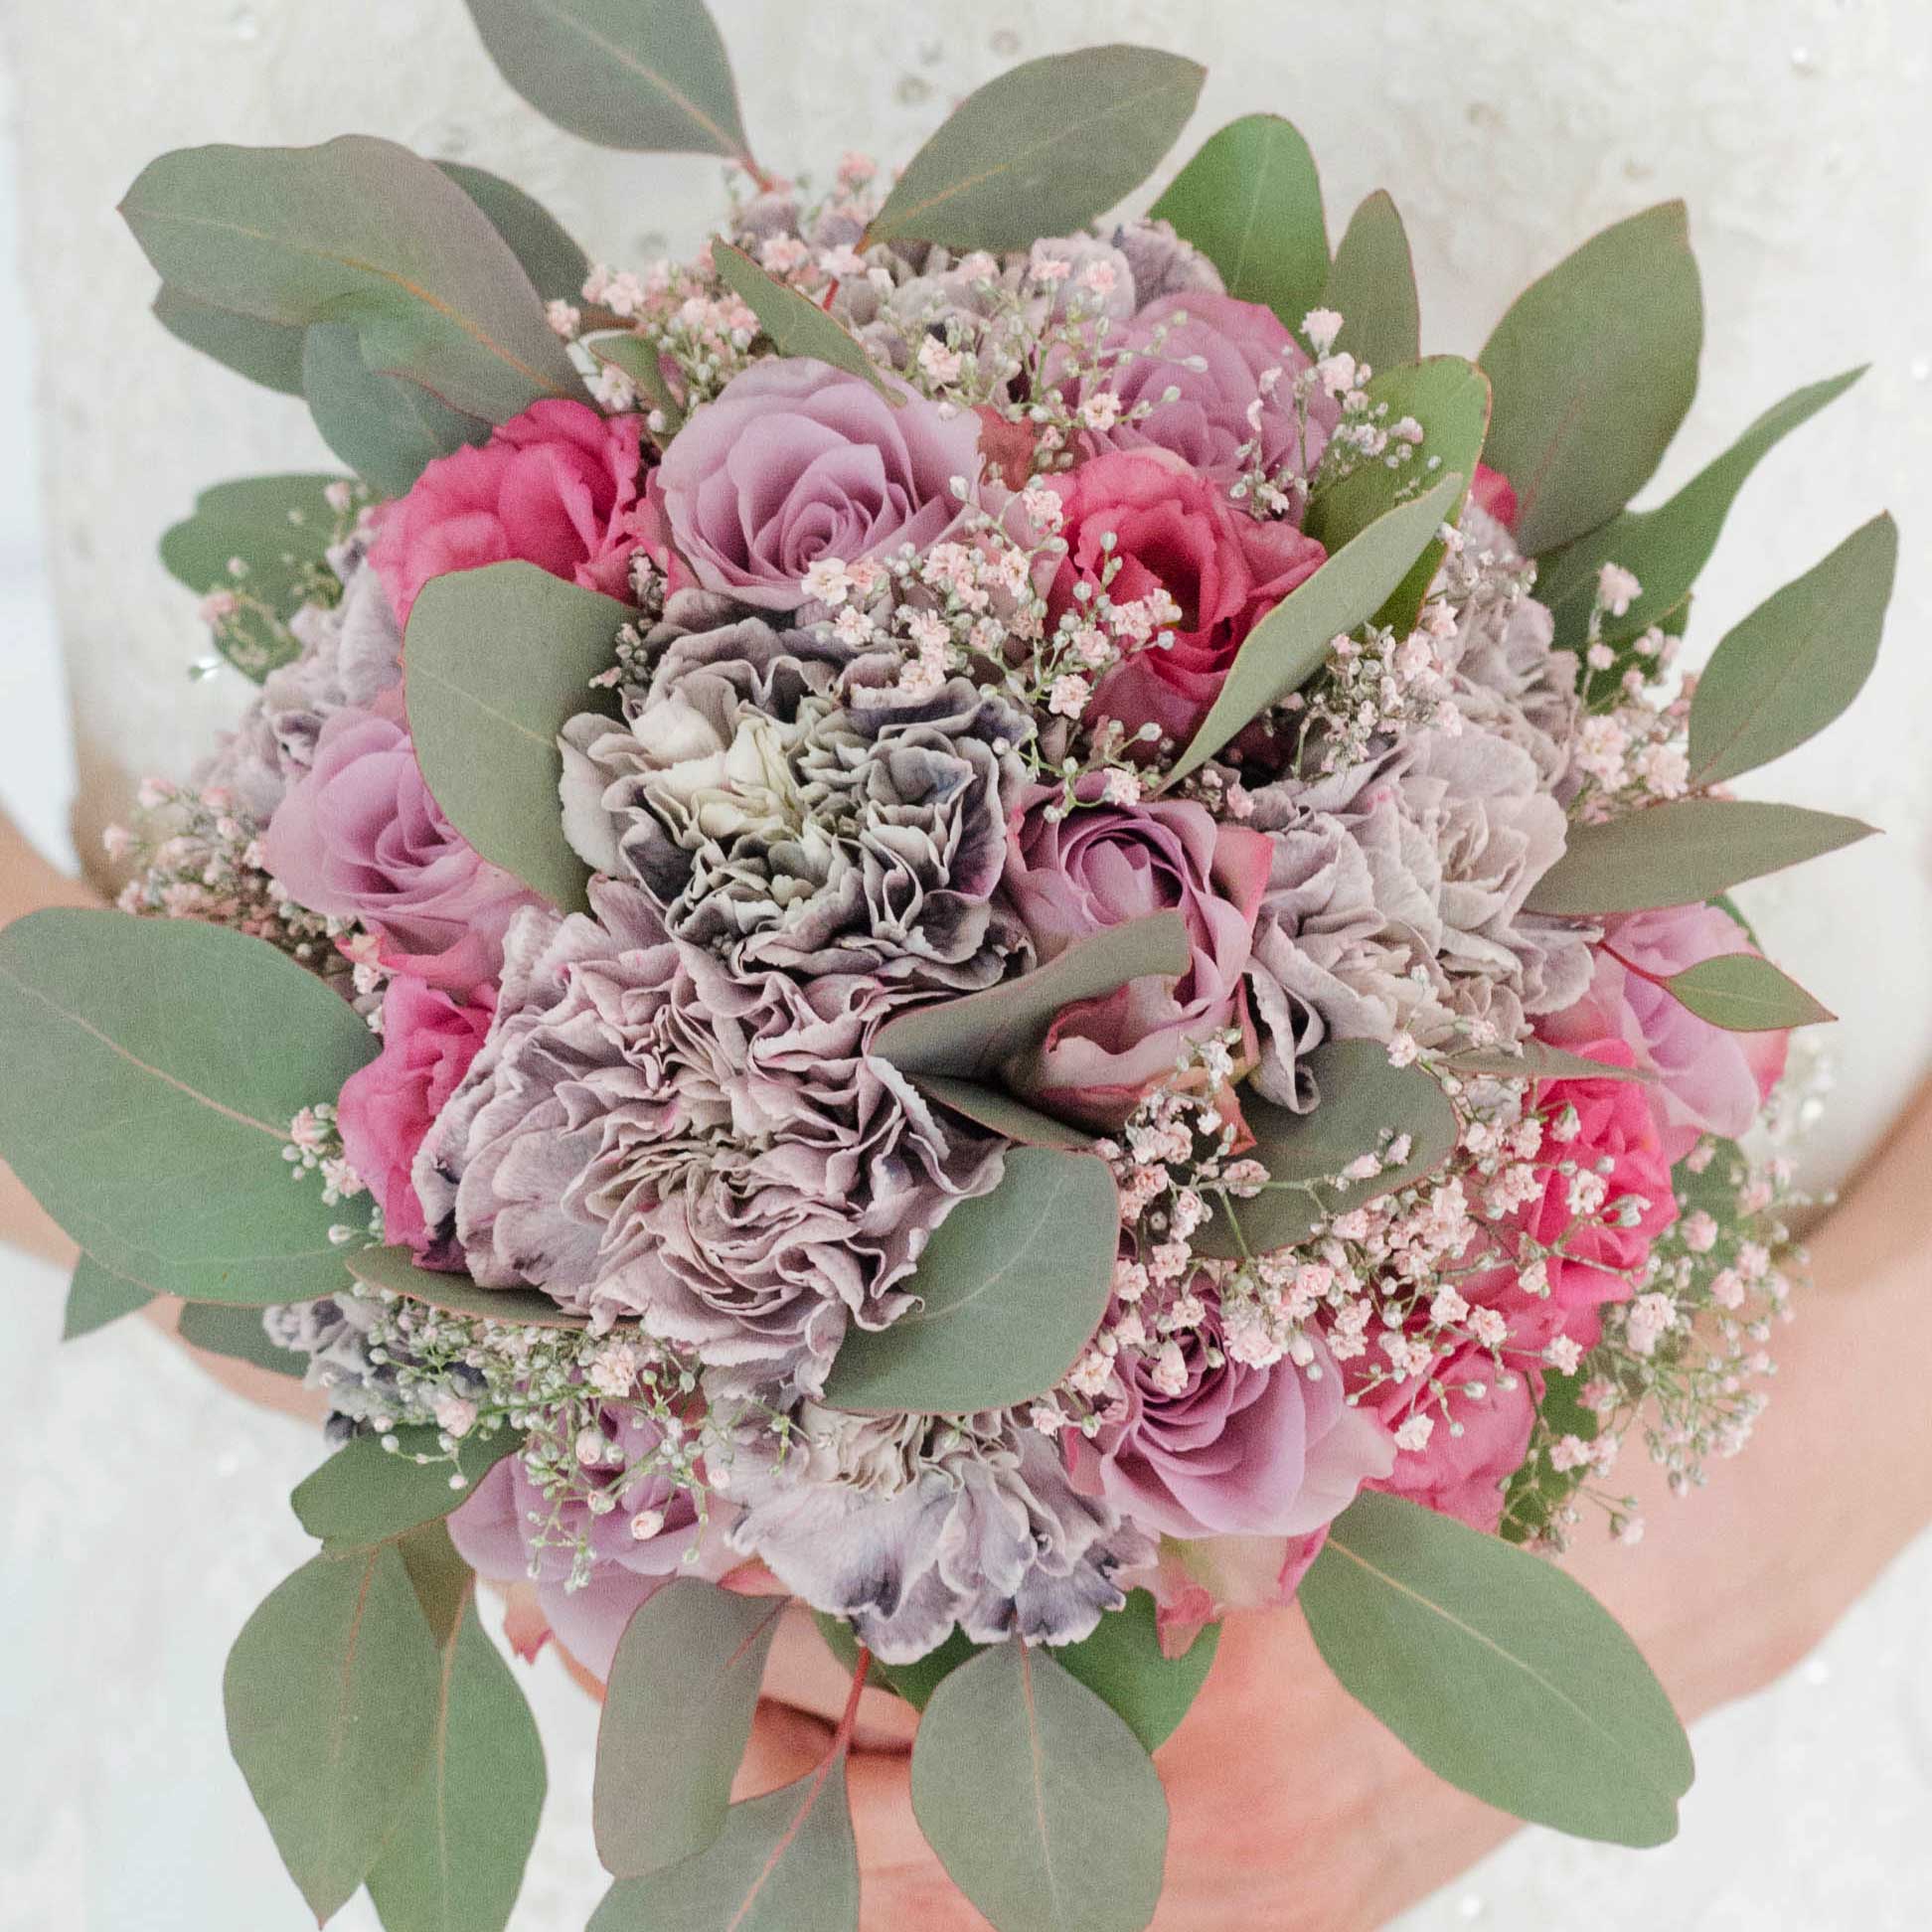 1676625300 177 The 5 bridal bouquet trends for 2023 - The 5 bridal bouquet trends for 2023